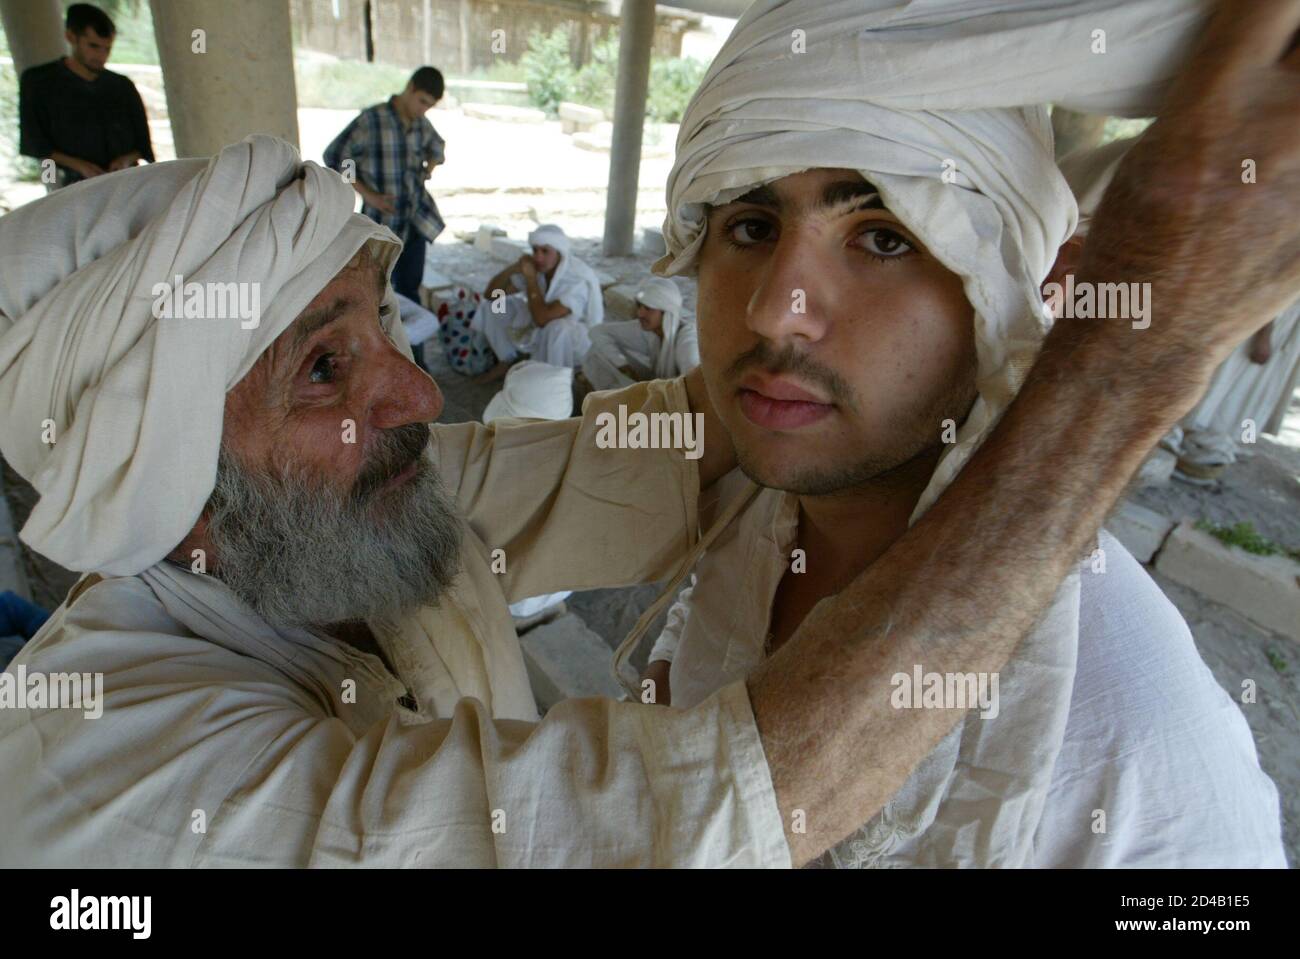 HAn Iraqi Mandean priest wraps the head of a groom in cloth during a wedding ceremony for five couples, conducted in the ancient Aramaic language, on the Tigris river in Baghdad June 8, 2003. Iraqi devotees of an obscure religion who take John the Baptist as their central figure perform virginity tests on their brides and take a dip in the murky Tigris river every Sunday to purify the soul. Most of the worldAEs 20,000 or so Mandeans live in southern Iraq and southwestern Iran. REUTERS/Faleh Kheiber  CLH/ Stock Photo